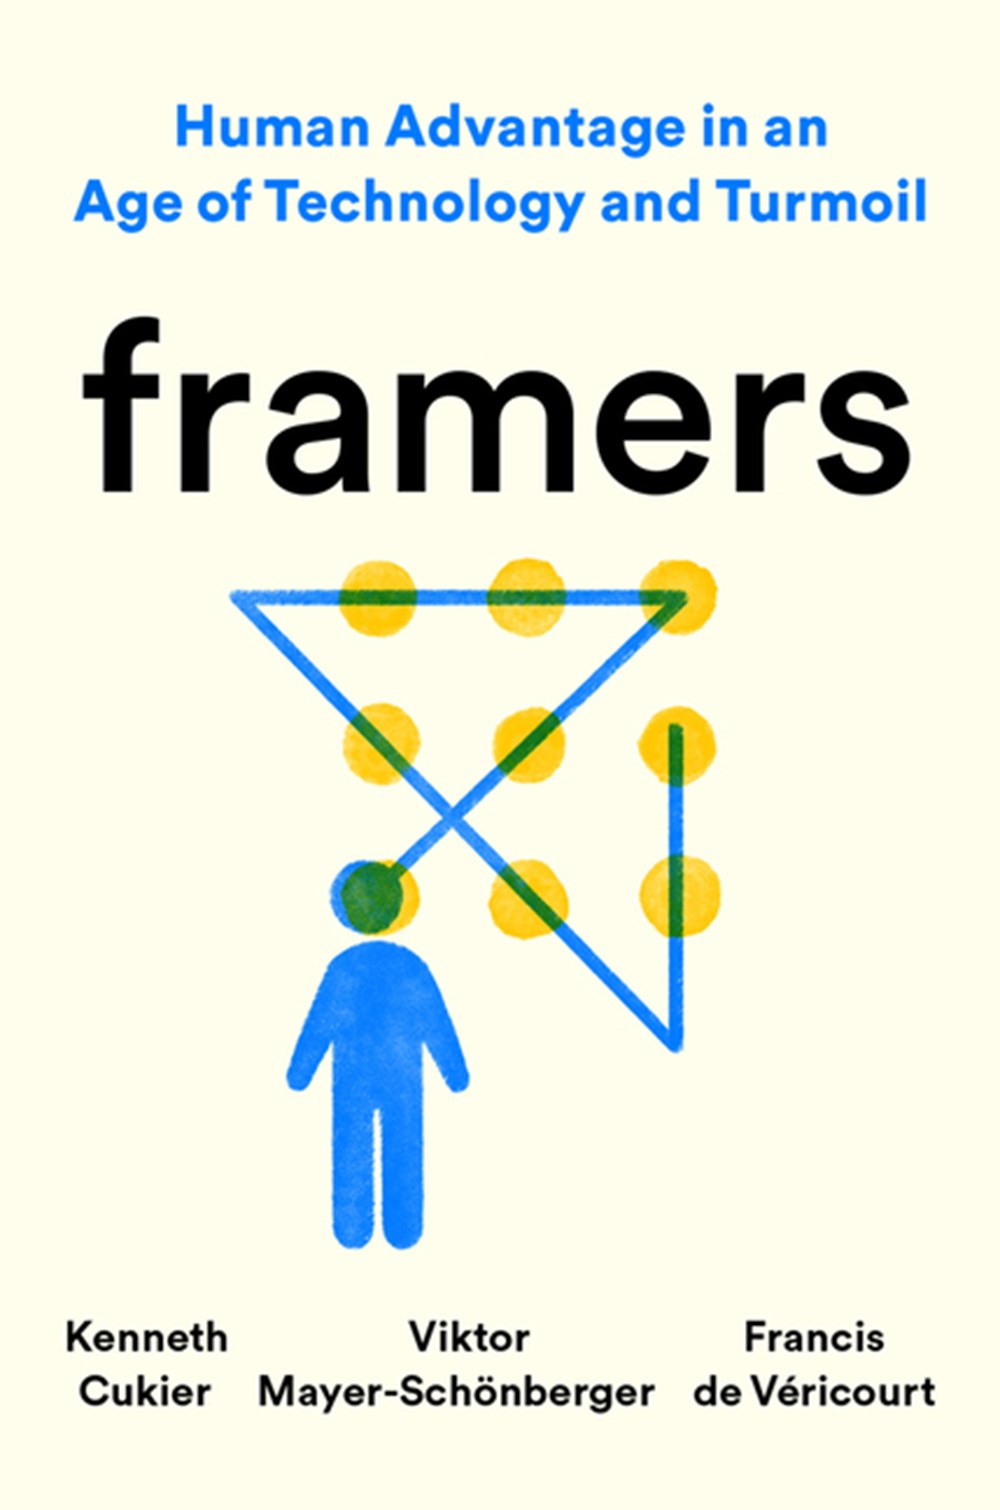 Framers Human Advantage in an Age of Technology and Turmoil